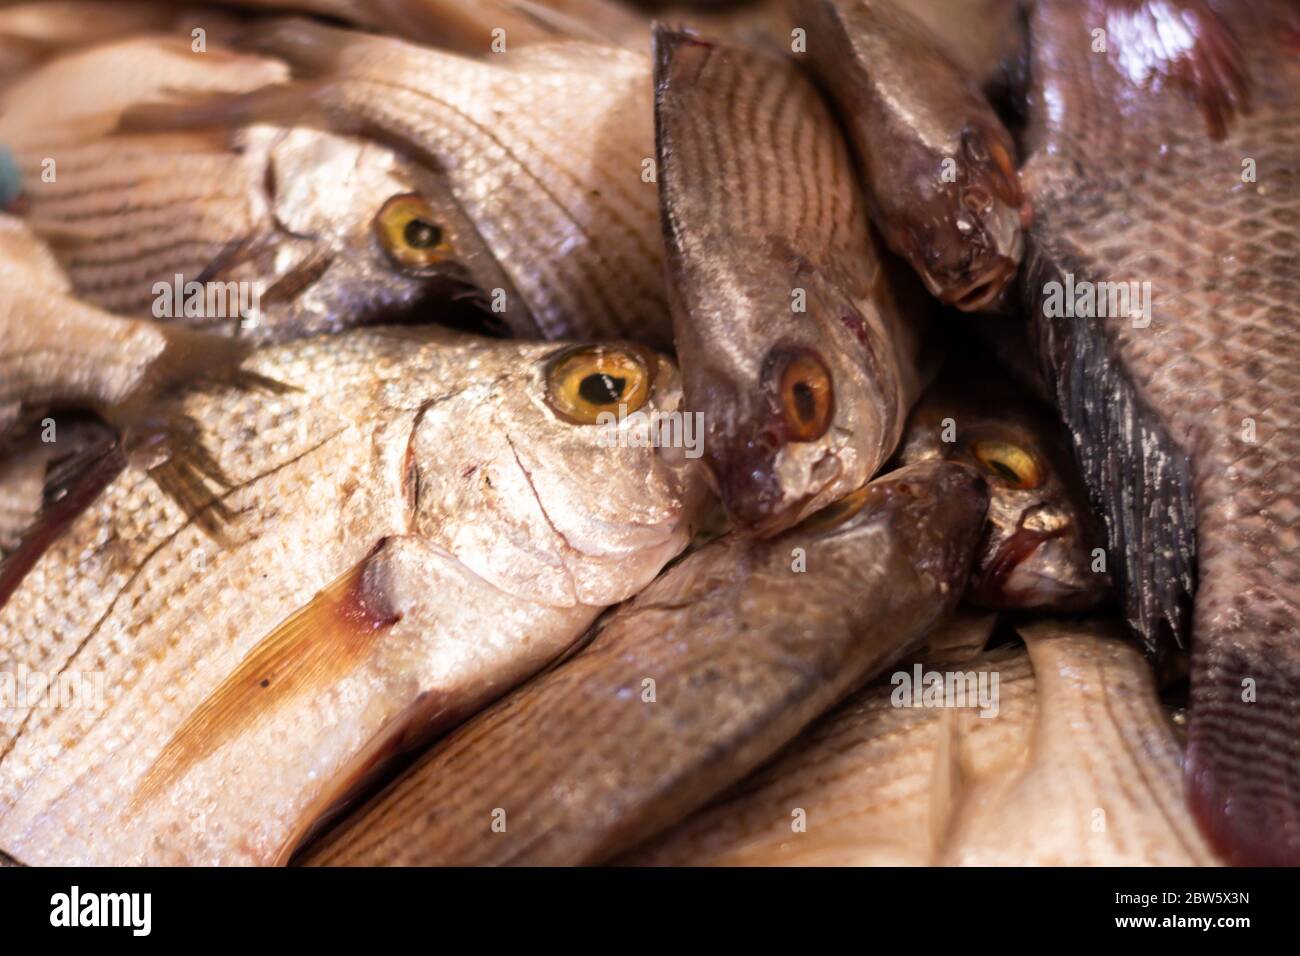 Fresh fish in the market. Marine food Approach of scales and skin of fish from the sea. Stock Photo